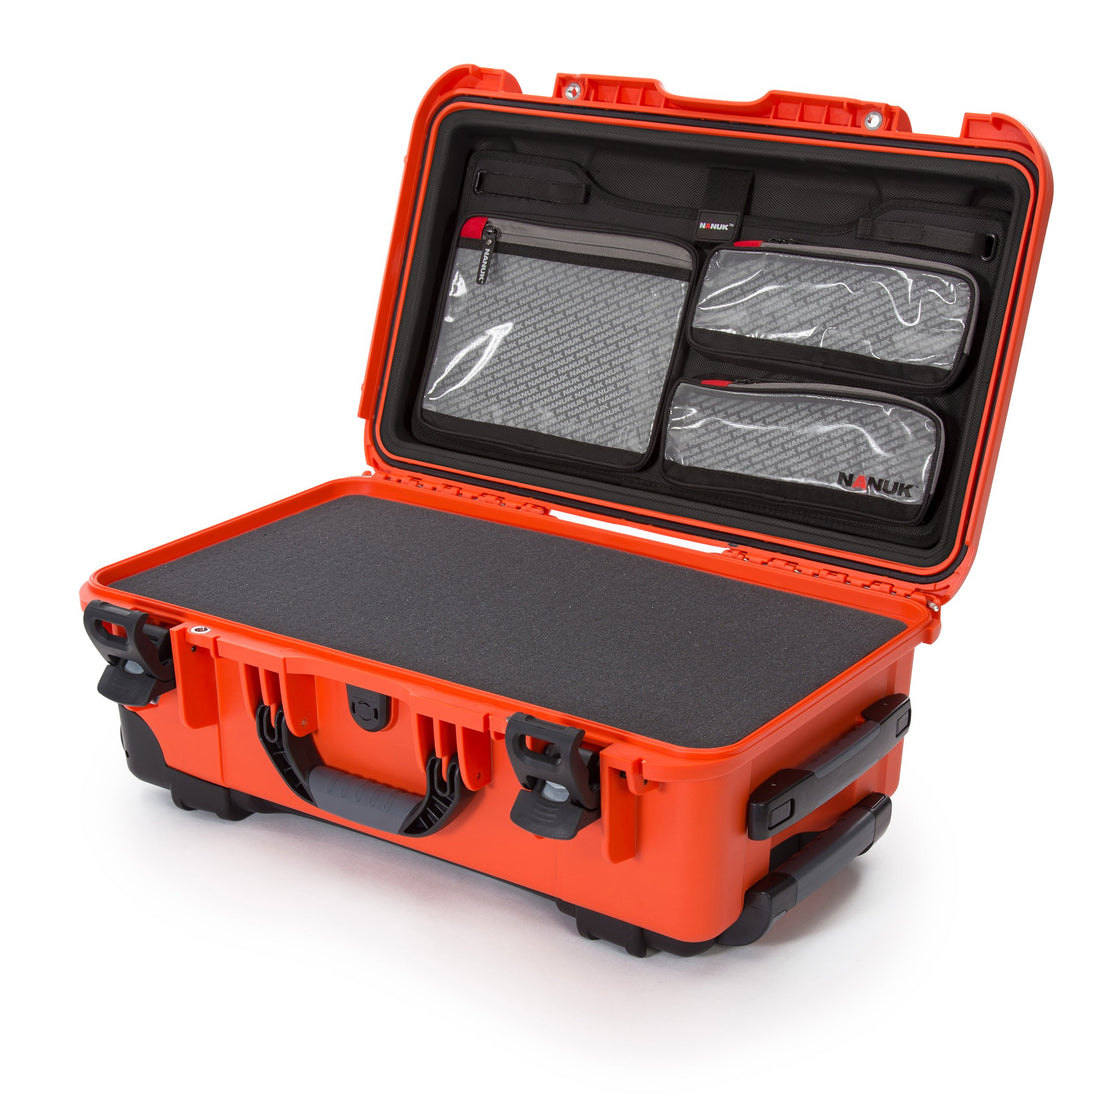 nanuk 935 protective travel case for 3 bottles of wine w wheels and extendable handle tsa approved orange